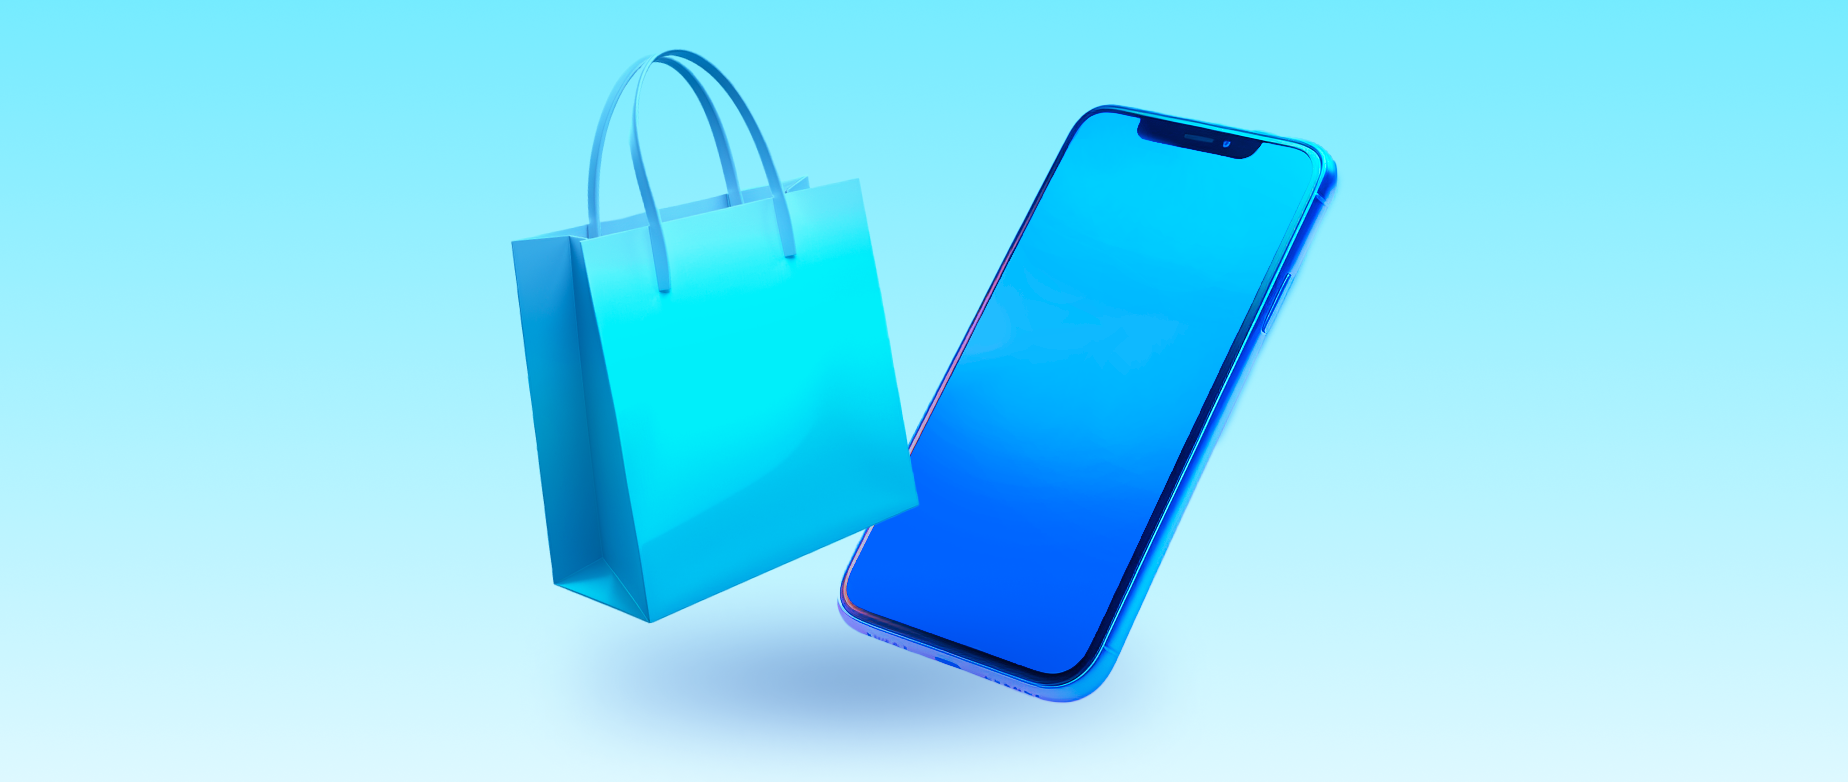 A blue shopping bag next to a blue phone on a light blue background.